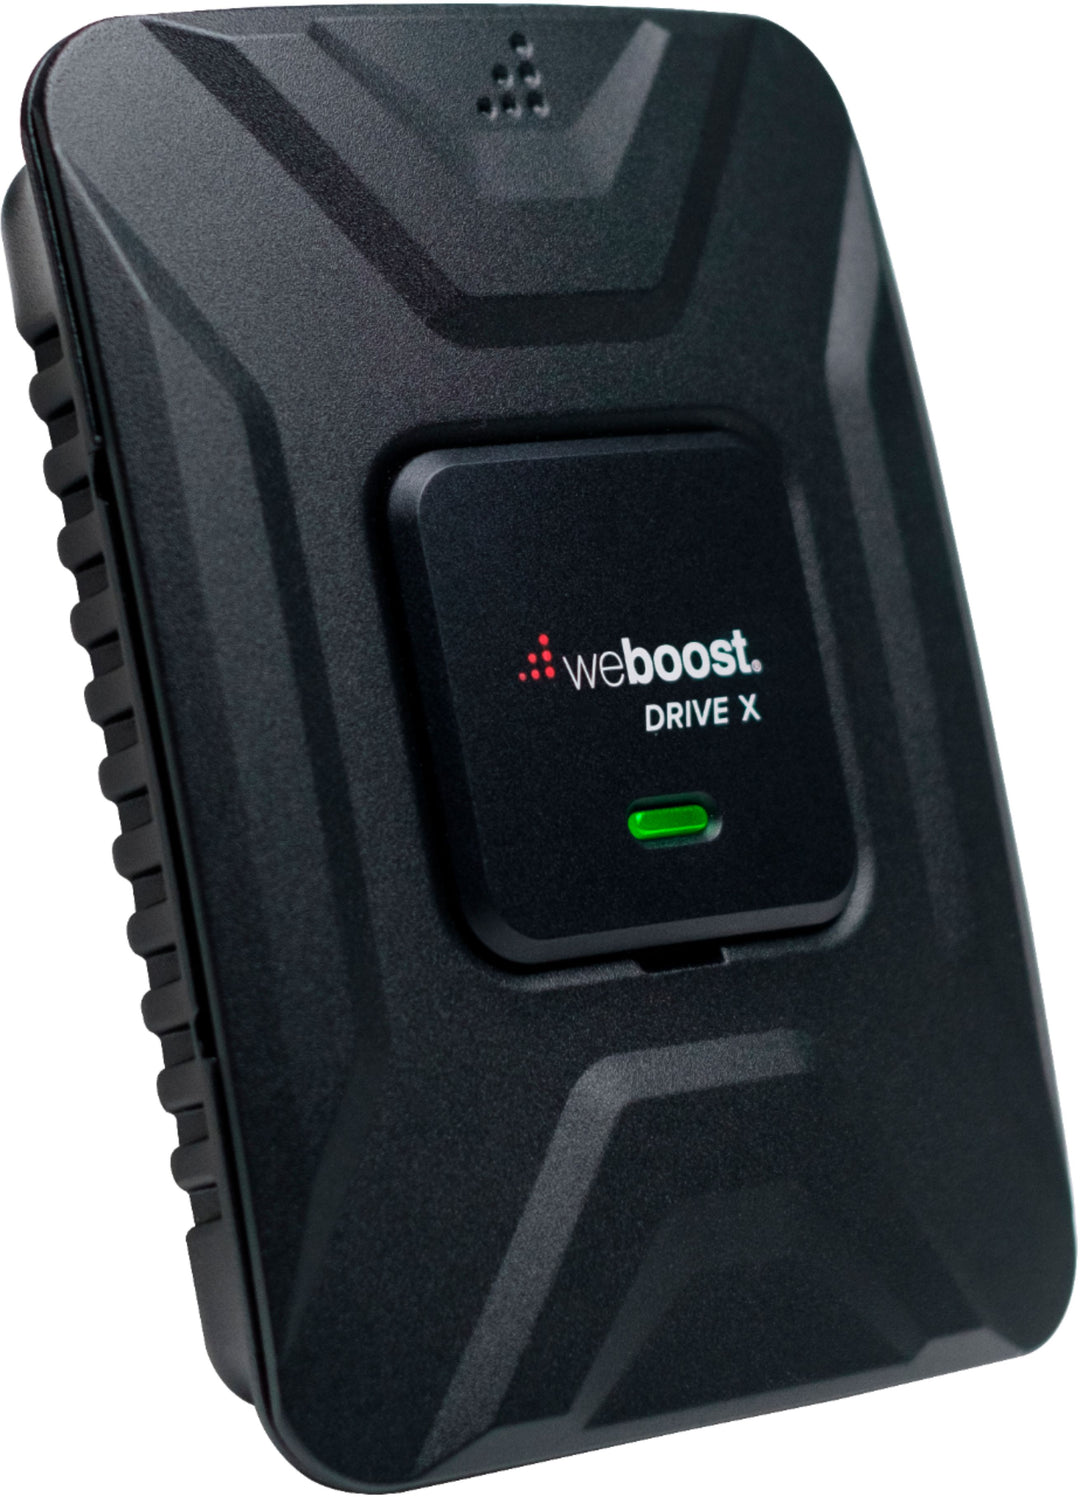 weBoost - Drive X Vehicle Cell Phone Signal Booster for Car, Truck, Van, or SUV, Boosts 5G & 4G LTE for All U.S. Carriers_5